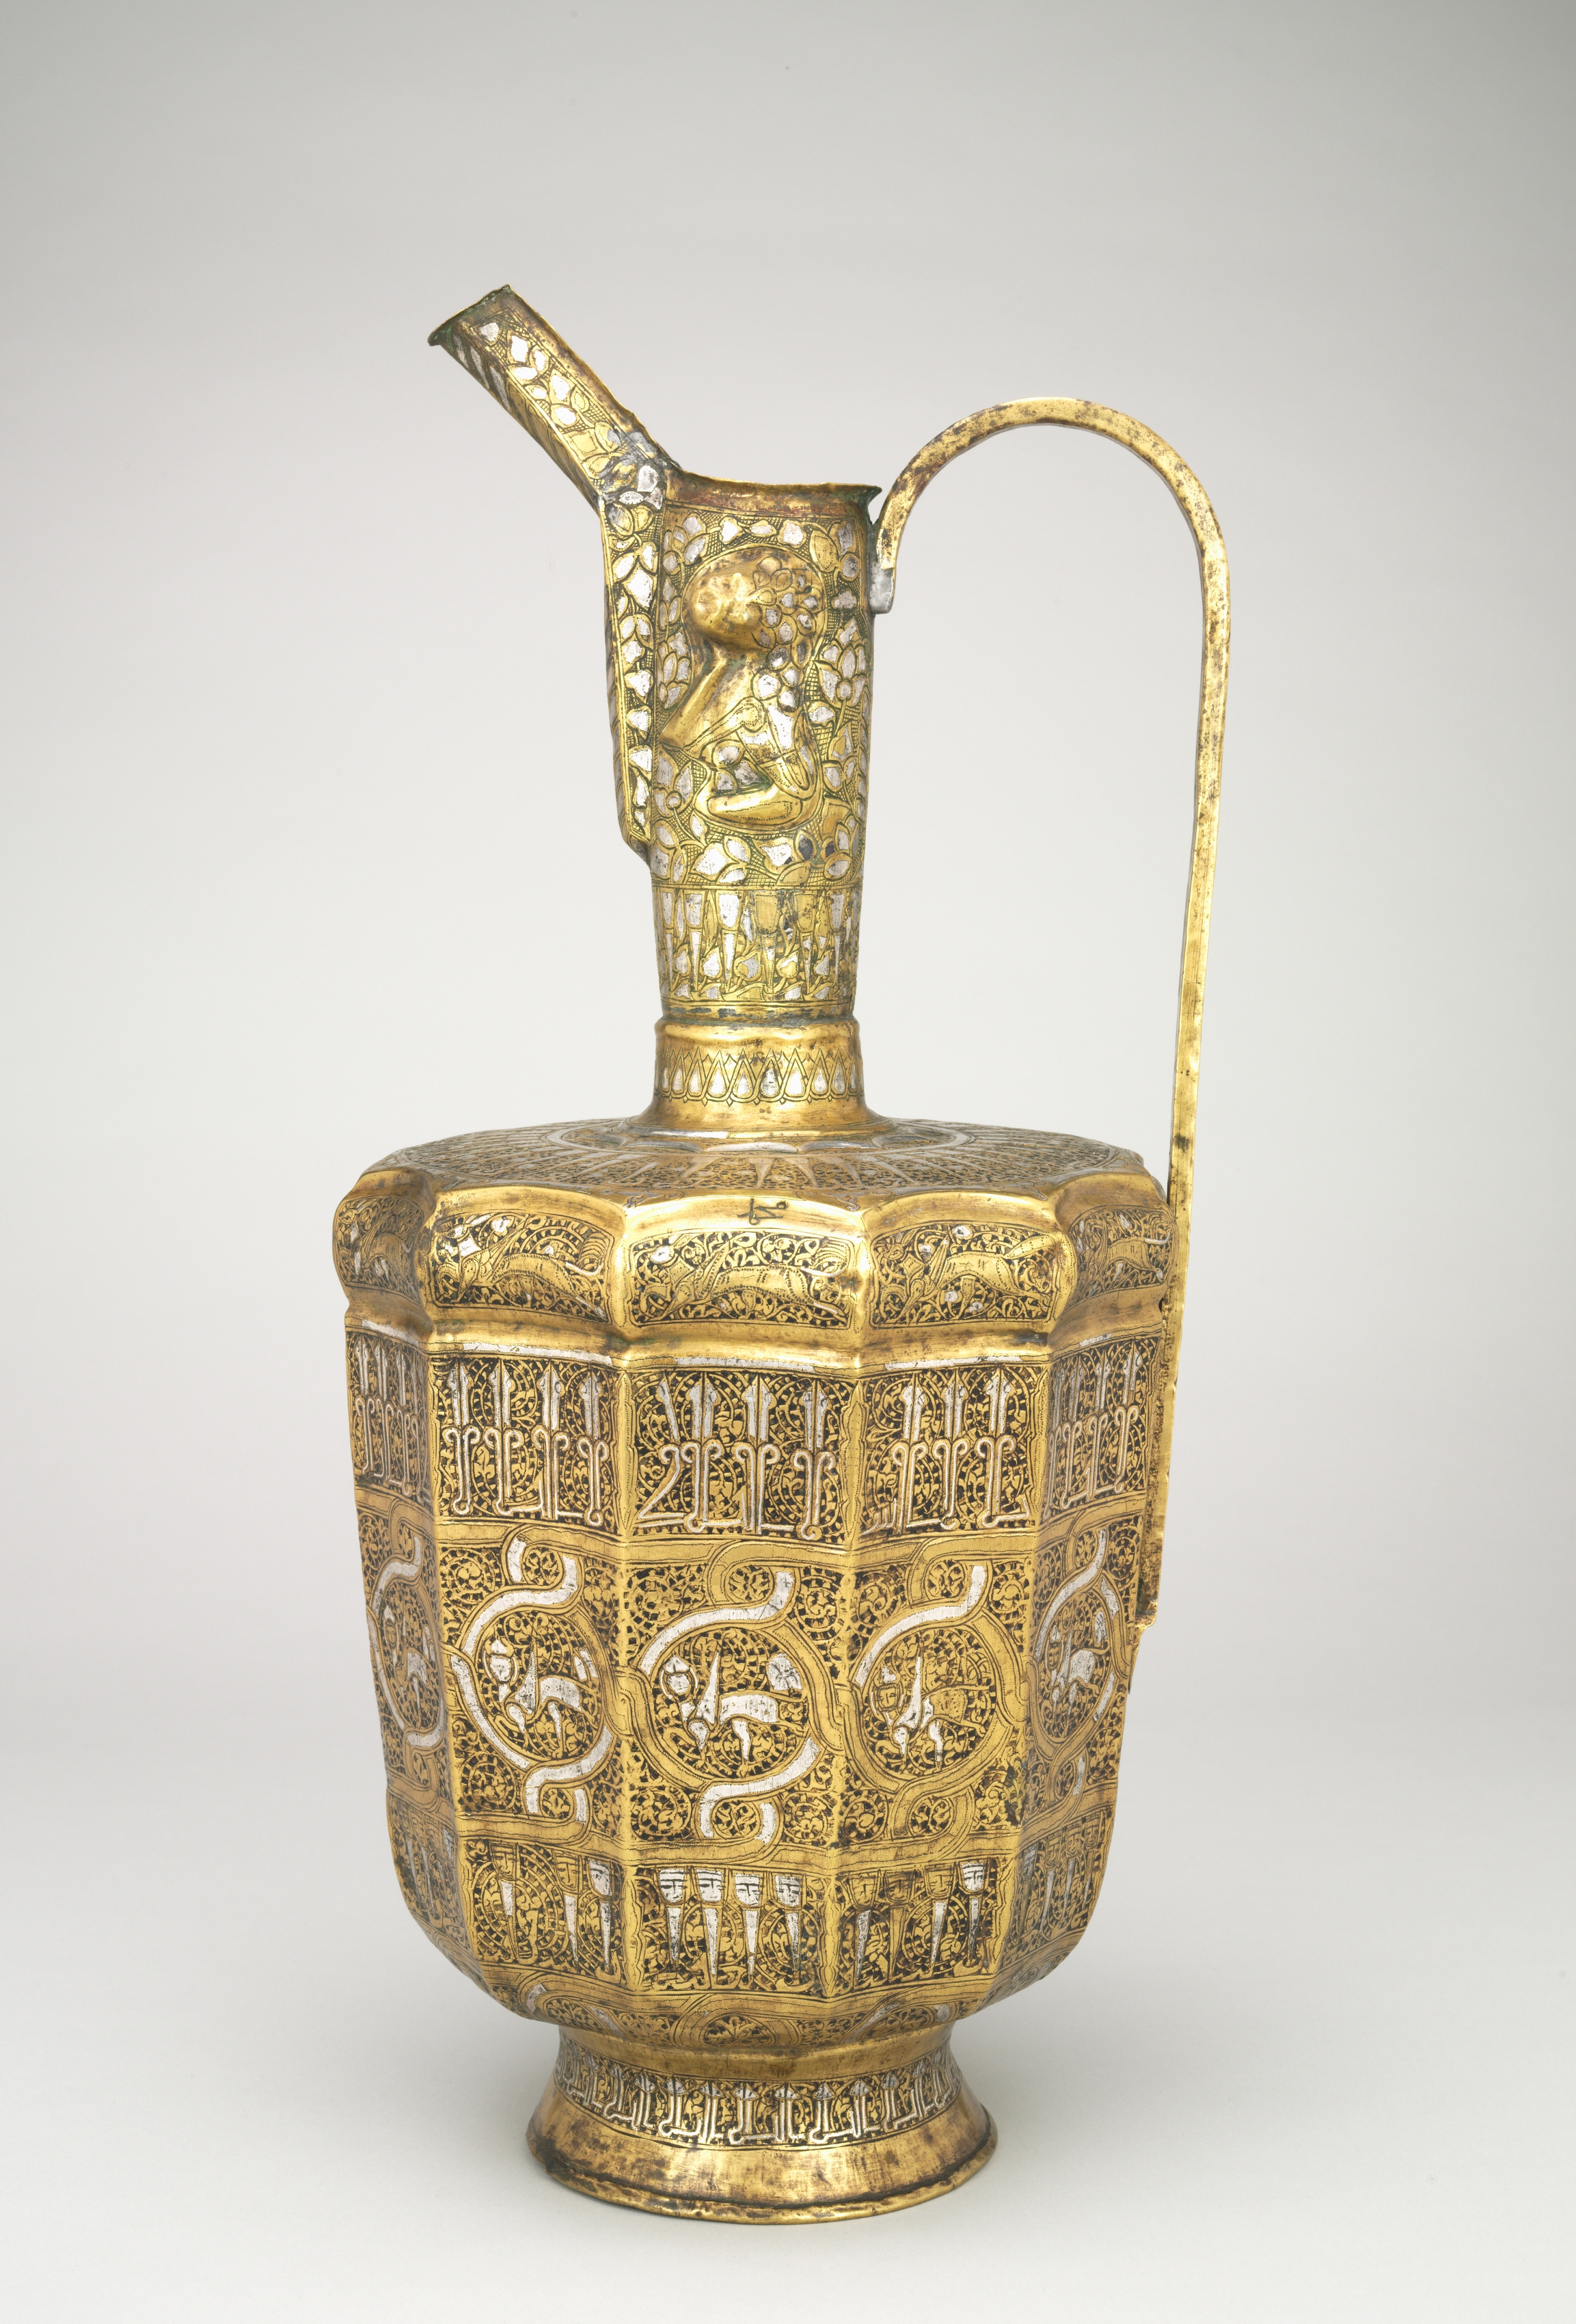 Twelve-sided Ewer with Sphinxes and Human-Headed Inscriptions